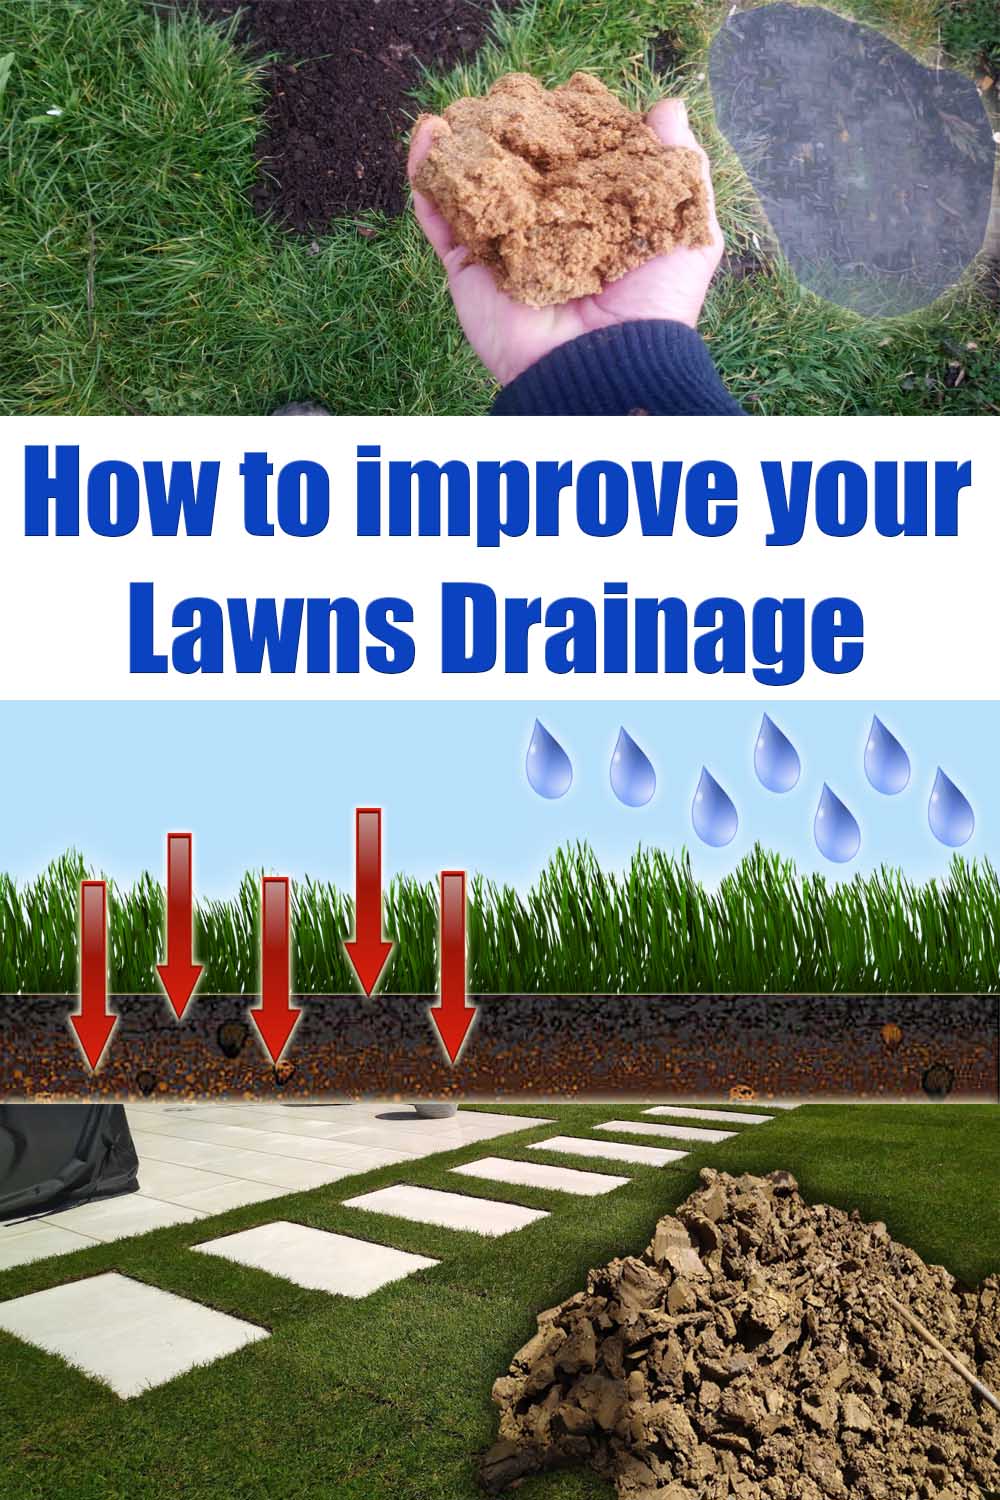 How to improve your lawns drainage